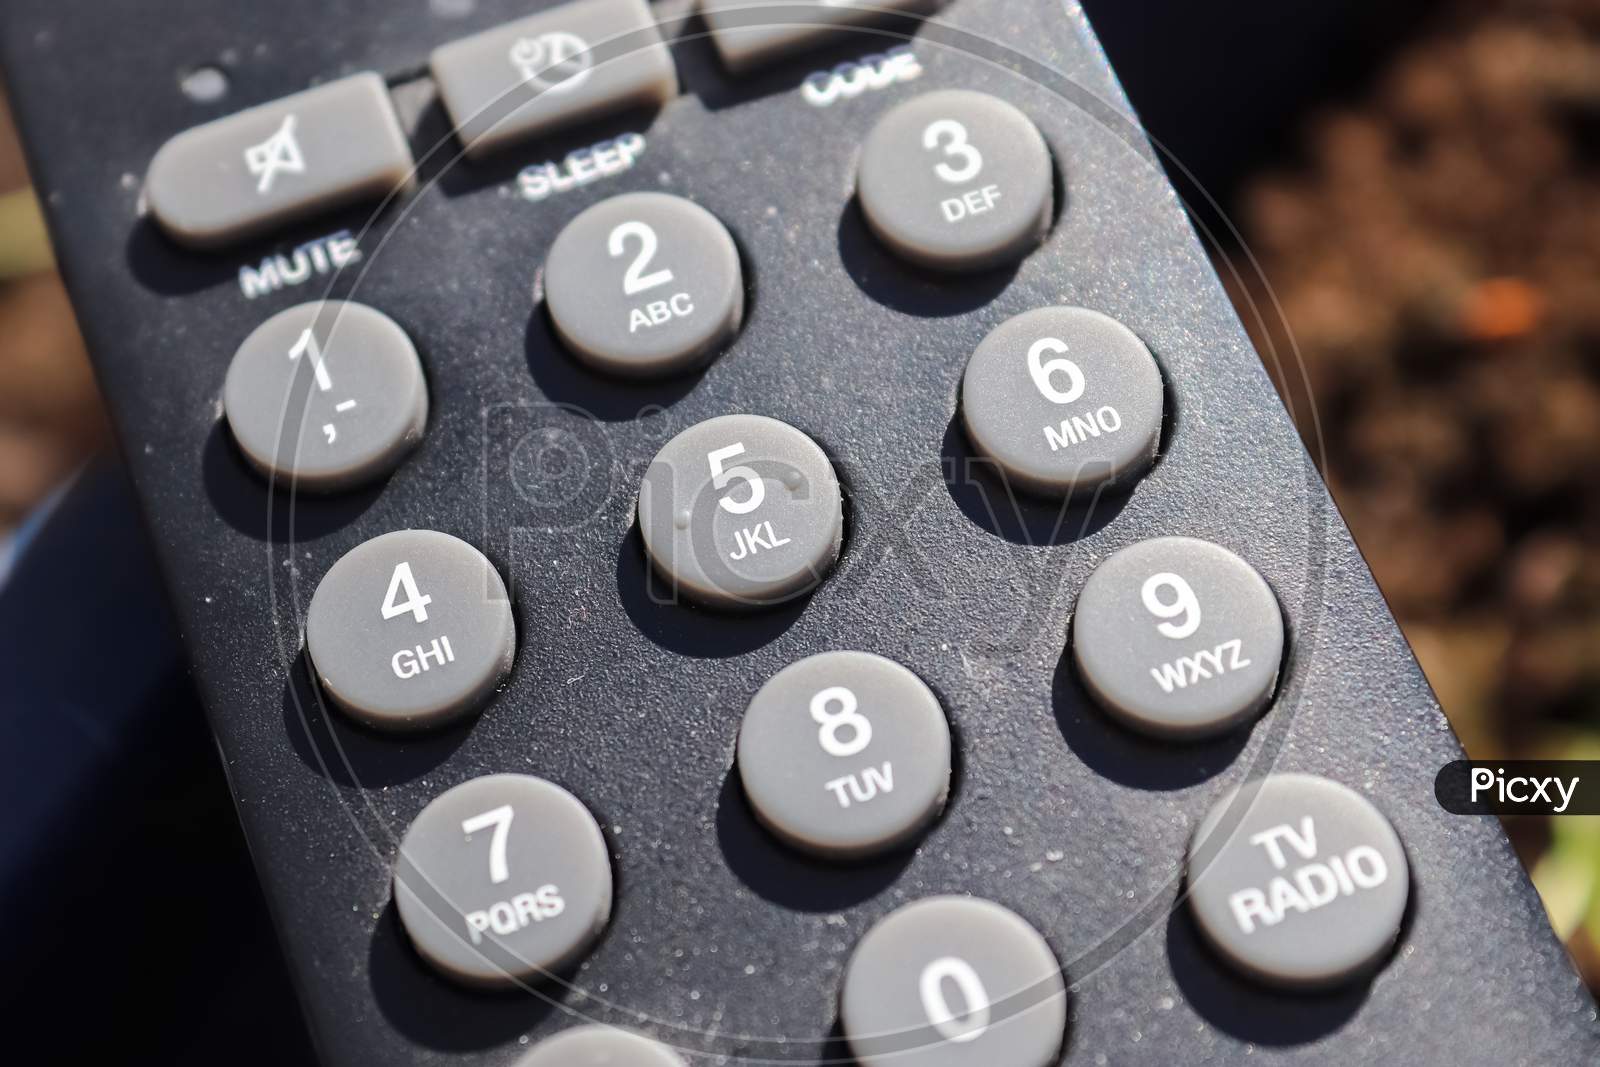 Close Up View On The Number Keys Of A Television Remote Control.